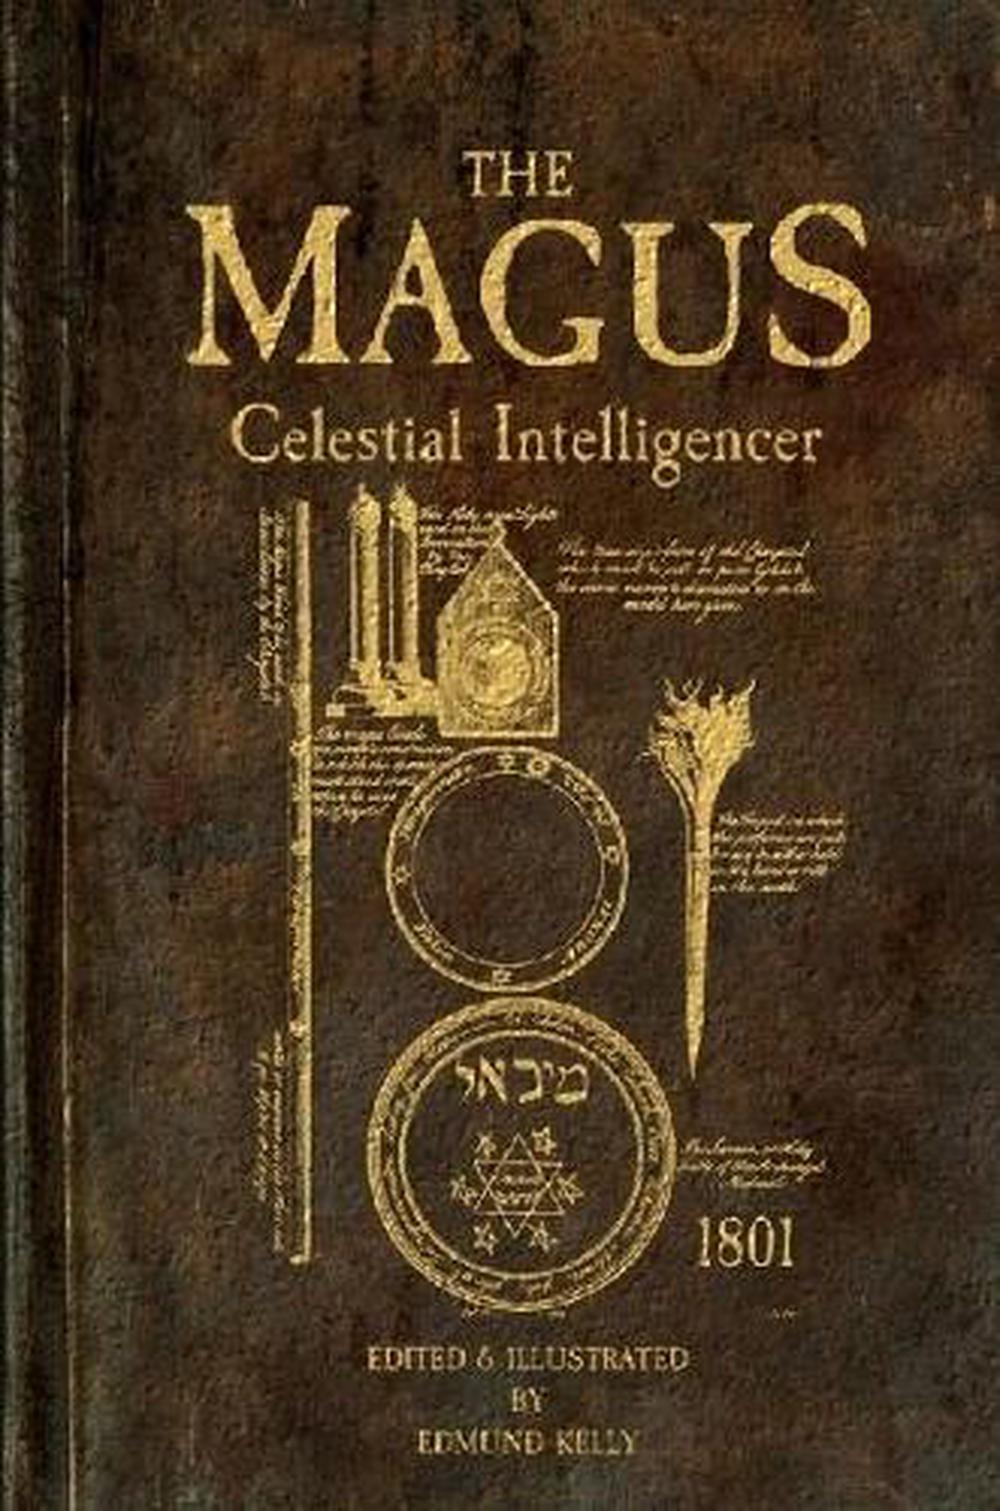 The Magus, Celestial Intelligencer by Edmund Kelly Paperback Book Free ...